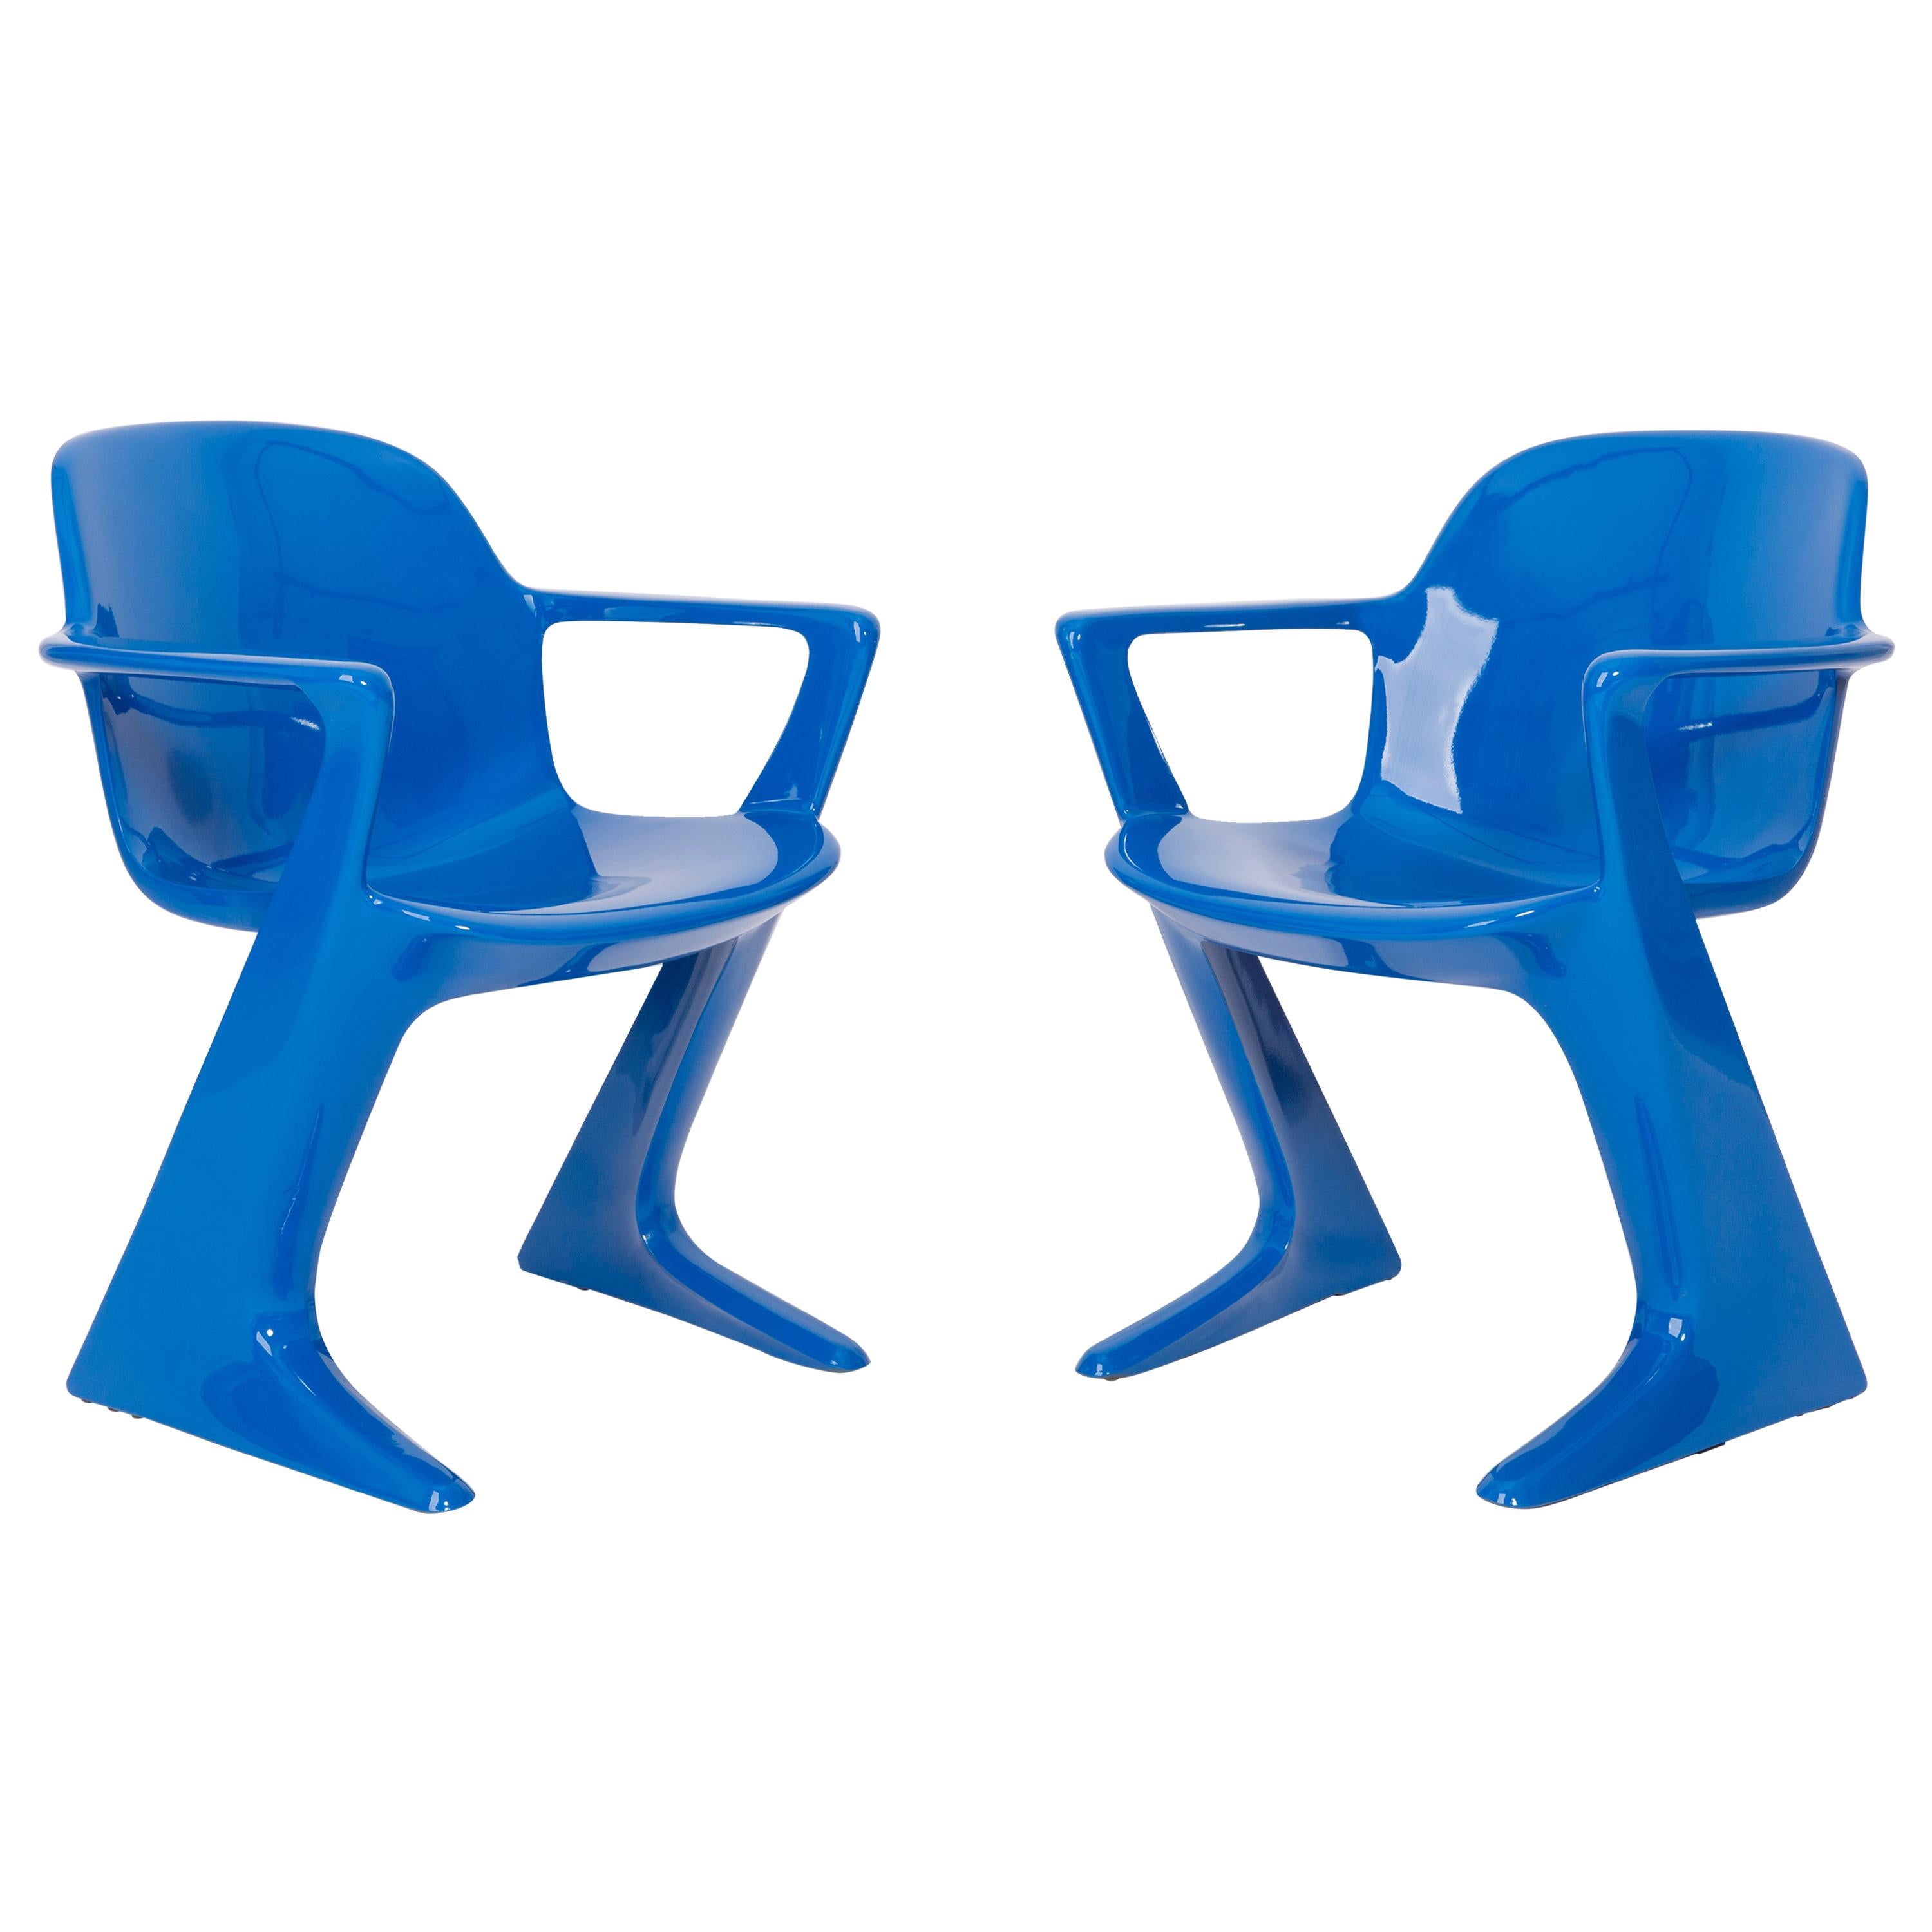 Set of Two Classic Blue Kangaroo Chairs Designed by Ernst Moeckl, Germany, 1968 For Sale